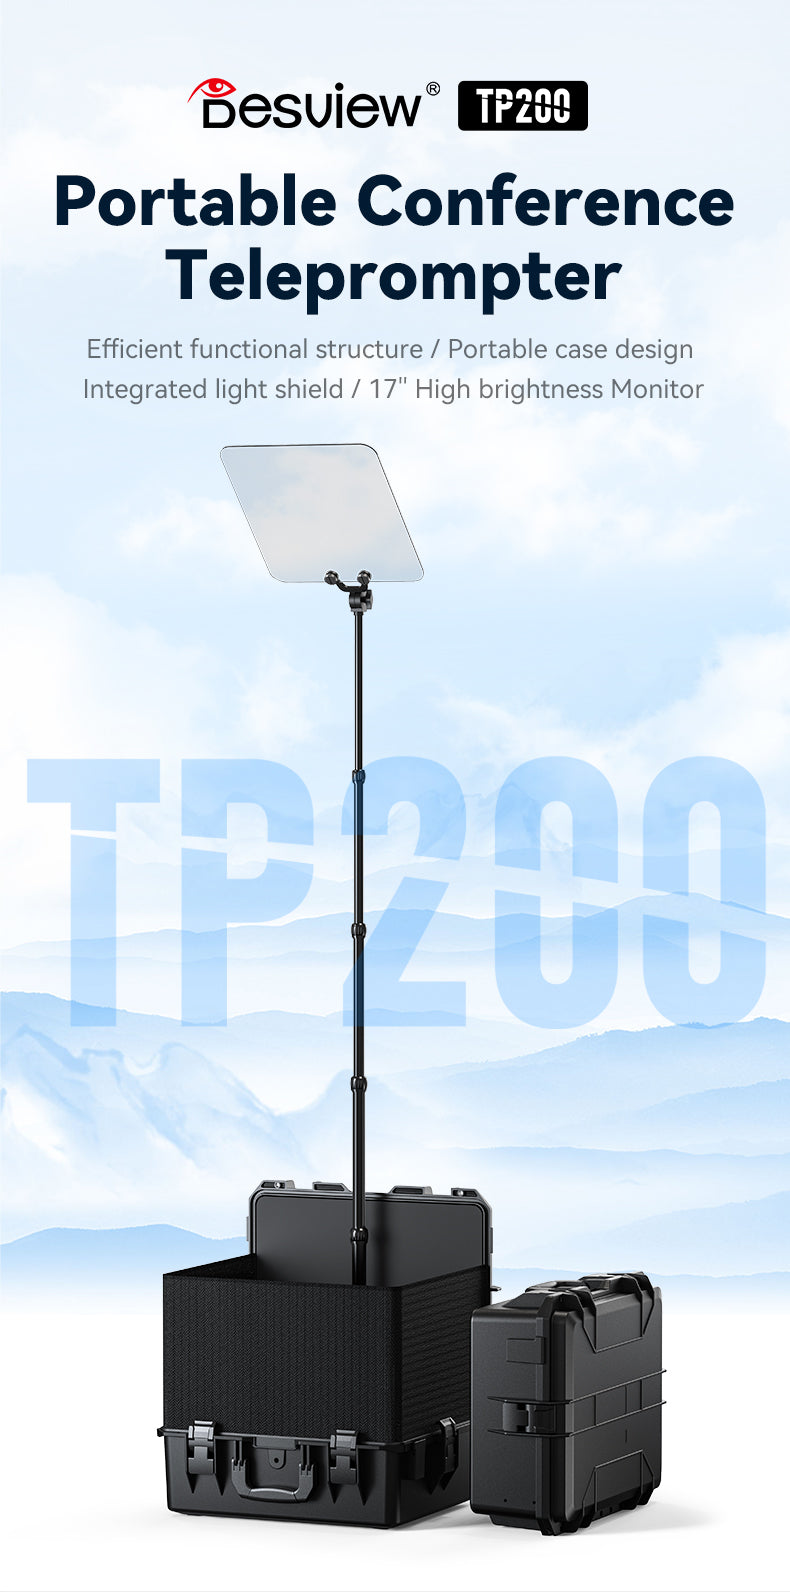 Desview TP200 Teleprompter Portable Landing Teleprompter 17inch 1000nits Screen for Conference Live Video Recording